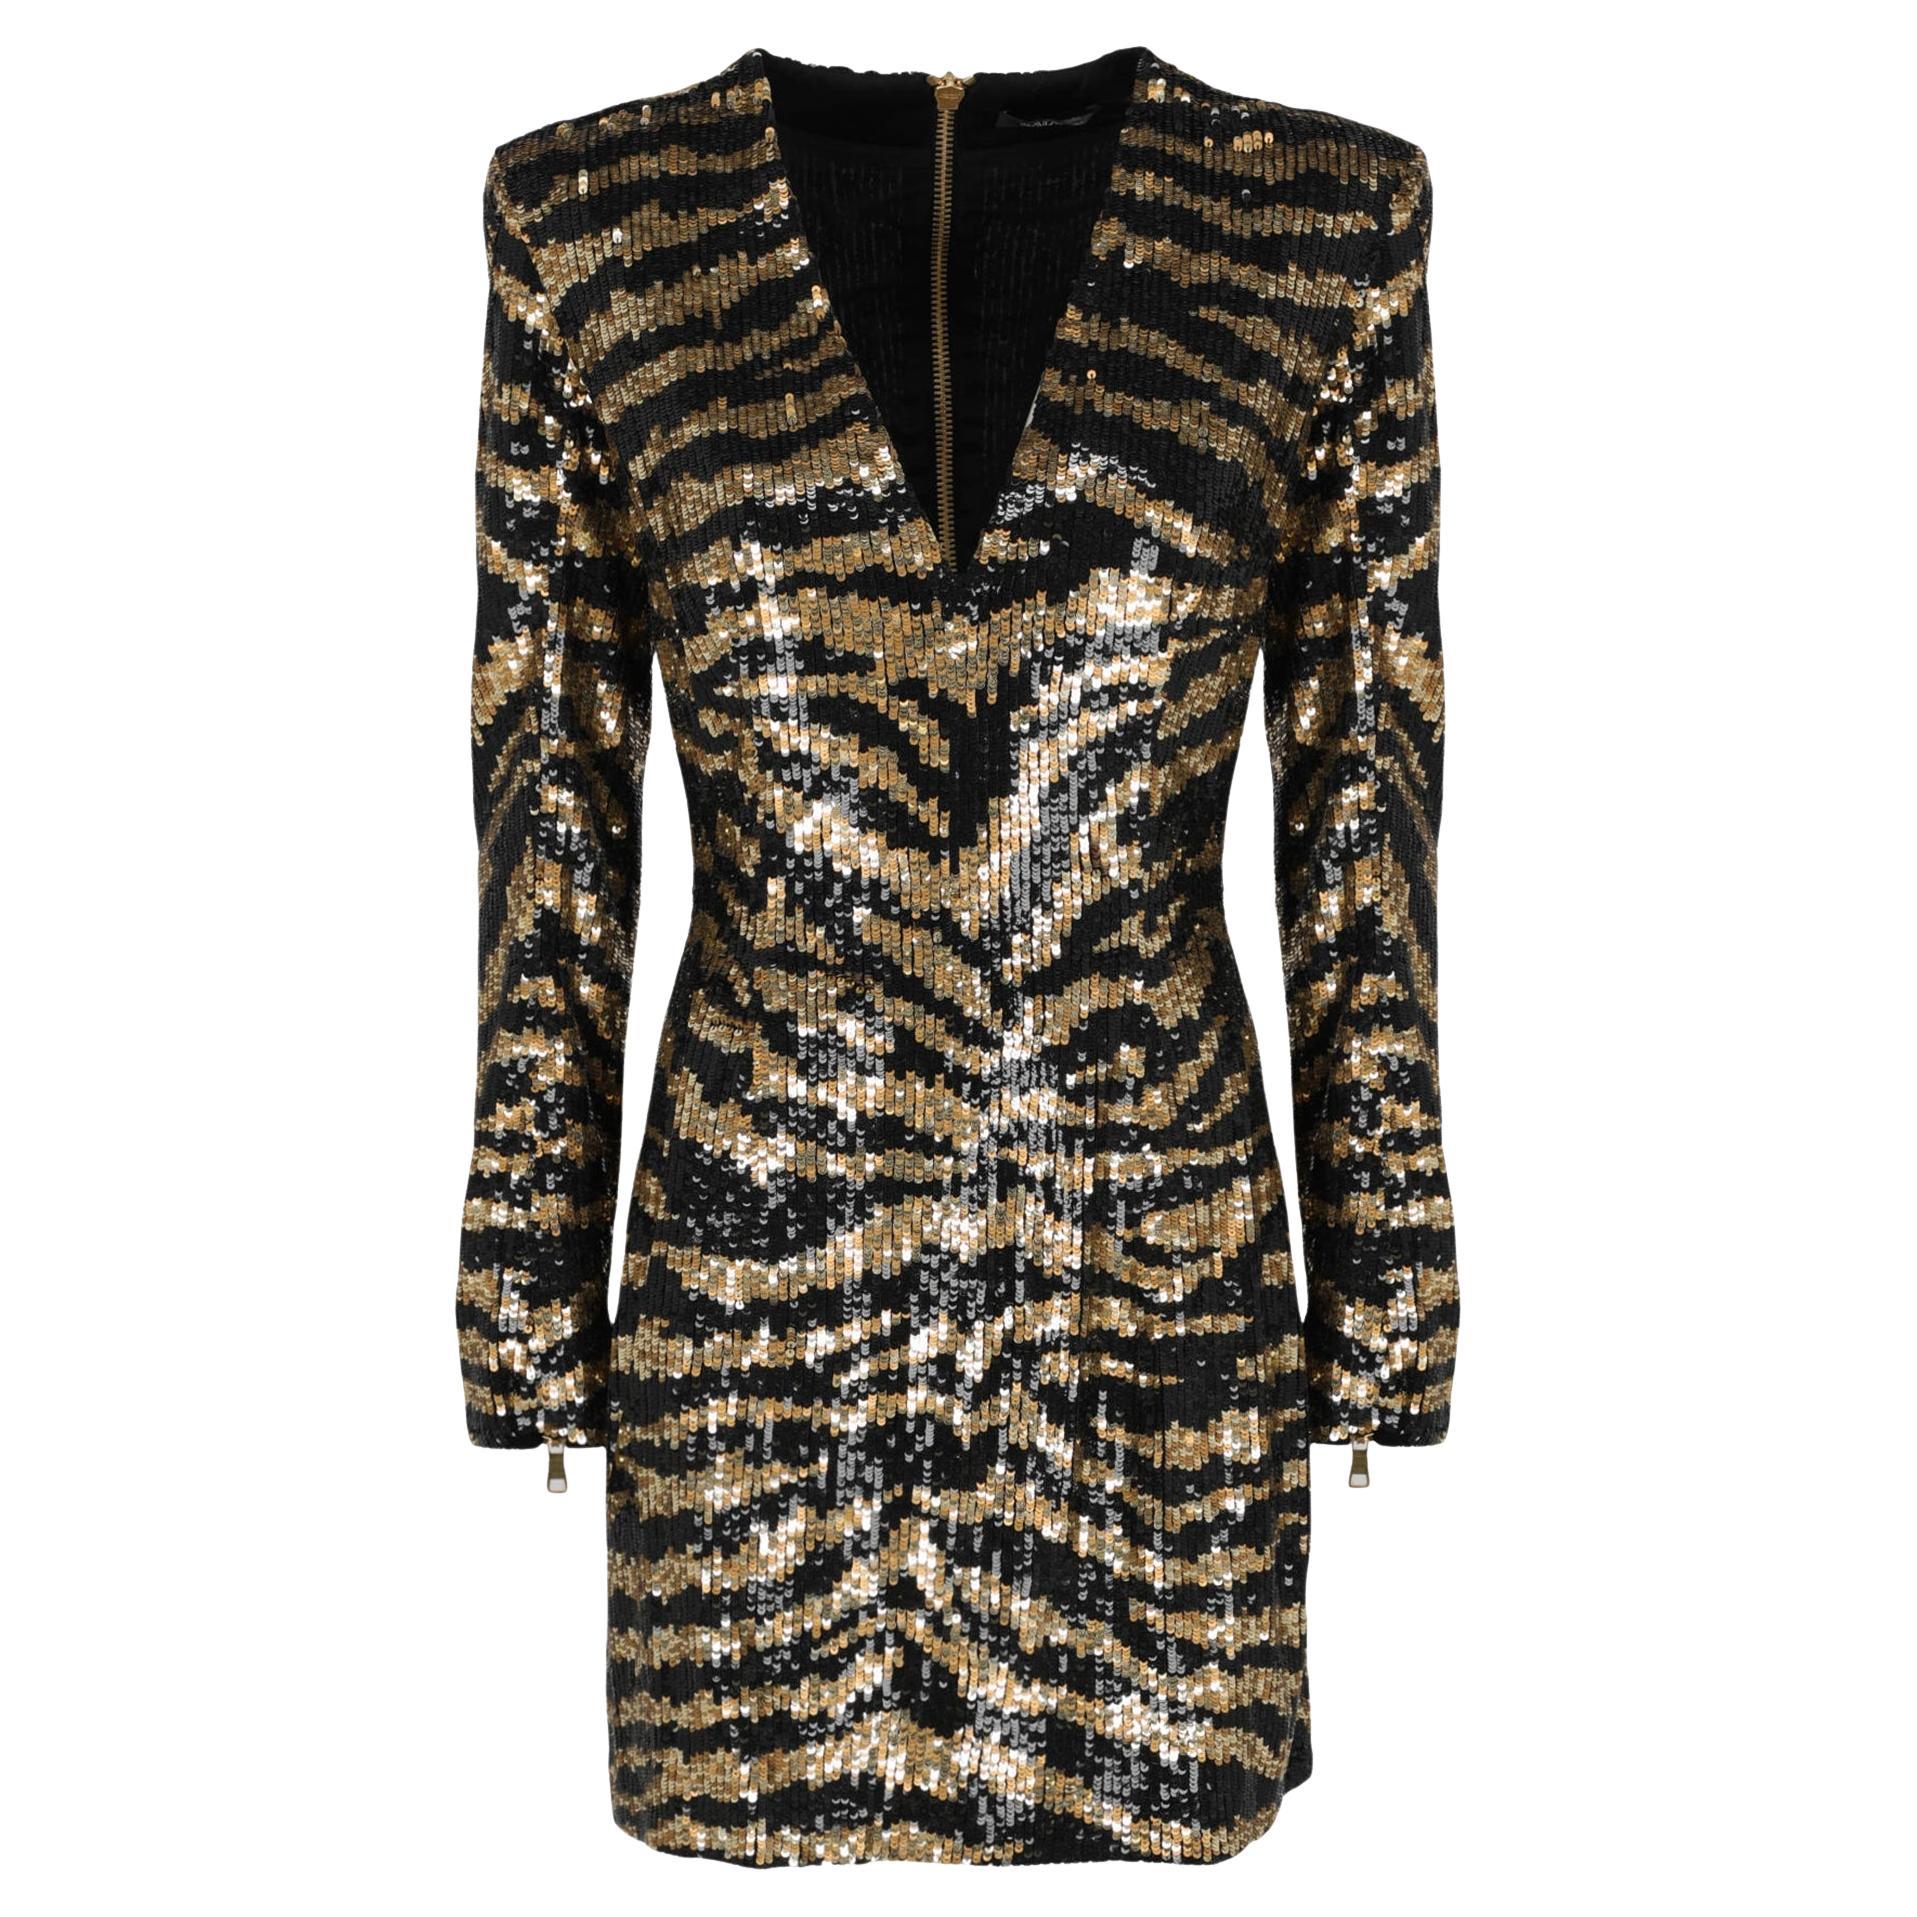 BALMAIN SEQUINED TIGER-STRIPE MINI DRESS in BLACK and GOLD Sz FR 36 For Sale